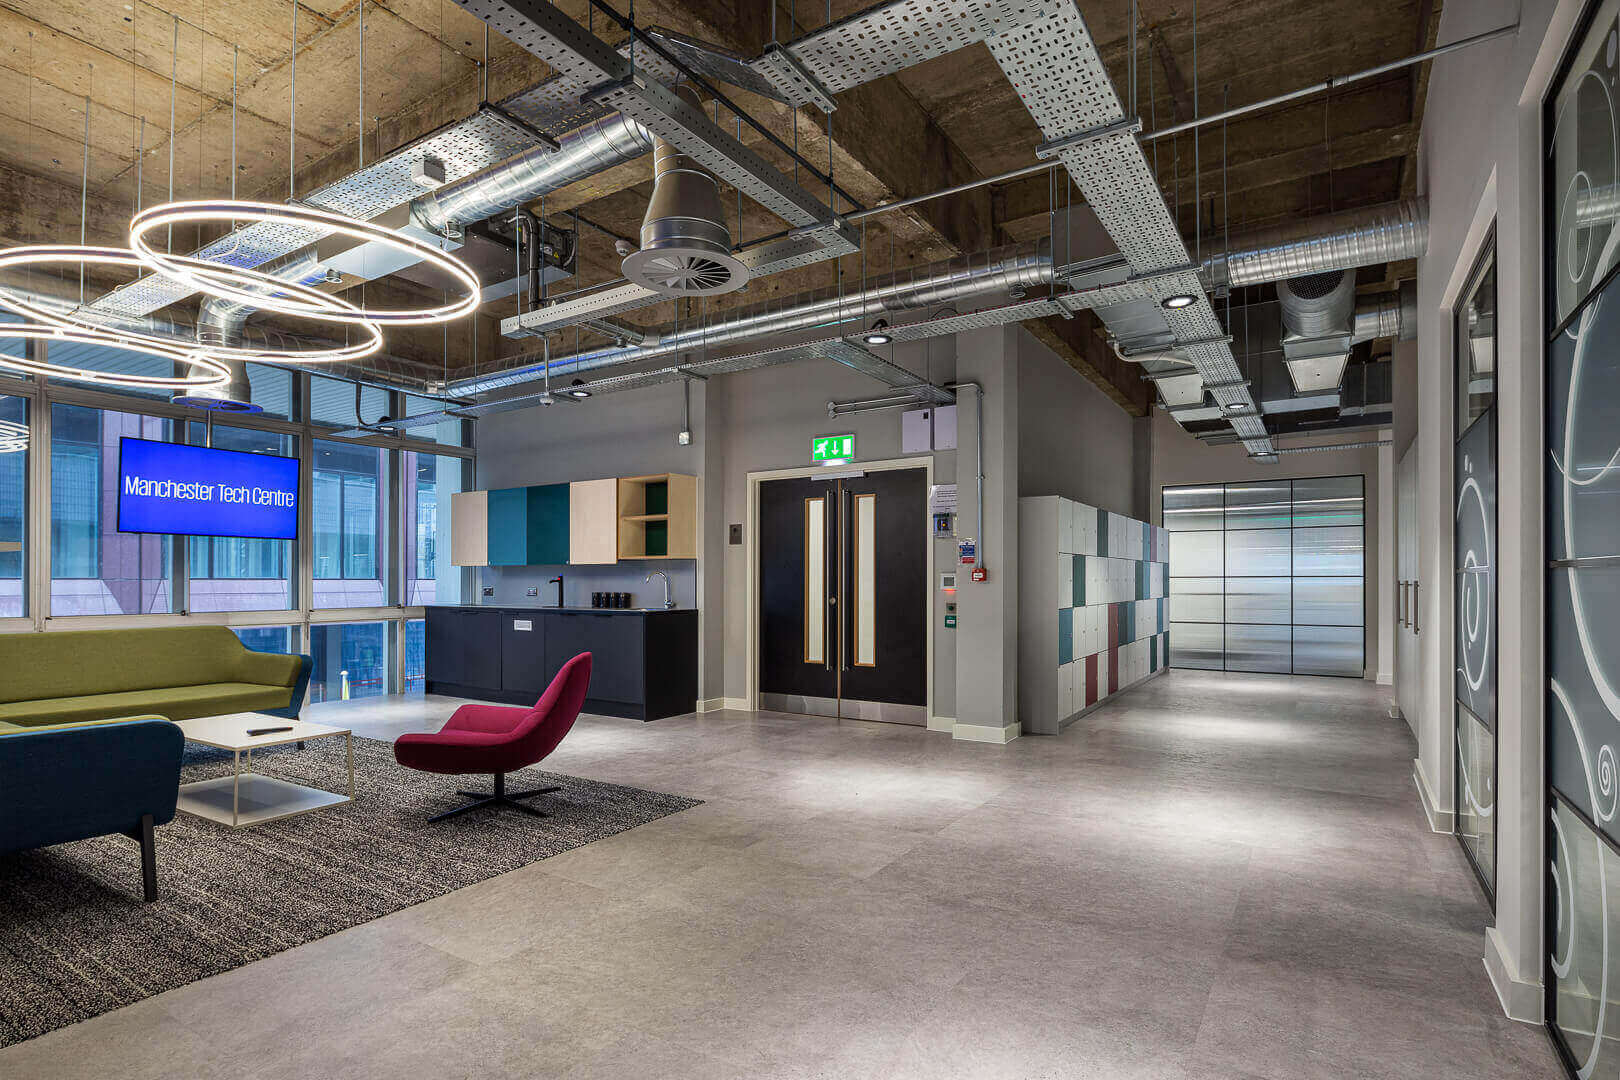 Commercial Architecture, Interiors & Aerial Photography - Workspace refurbishment in Manchester Technology Centre